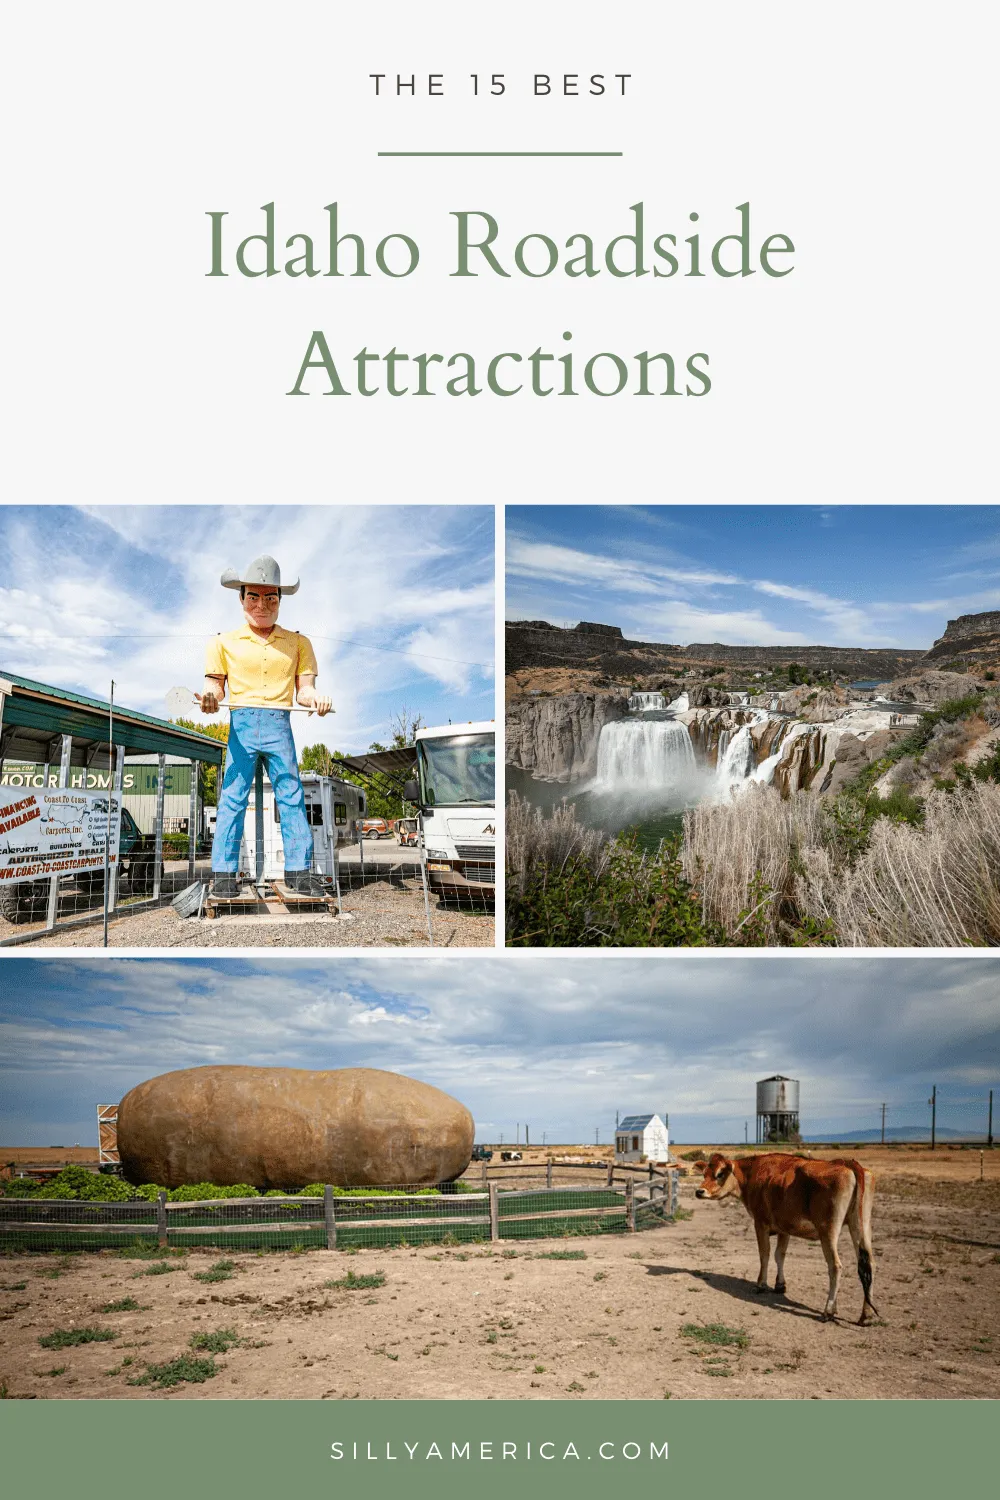 The best Idaho roadside attractions to visit on an Idaho road trip or weekend getaway. Add these roadside oddities and road trip stops to your bucket list and visit these roadside attractions in Idaho on your next travel adventure. #IdahoRoadsideAttractions #IdahoRoadsideAttraction #RoadsideAttractions #RoadsideAttraction #RoadTrip #IdahoRoadTrip #IdahoRoadTripMap #IdahoRoadTripBucketLists #IdahoBucketList #ThingsToDoInIdaho #IdahoRoadTripTravelTips #WeirdRoadsideAttractions